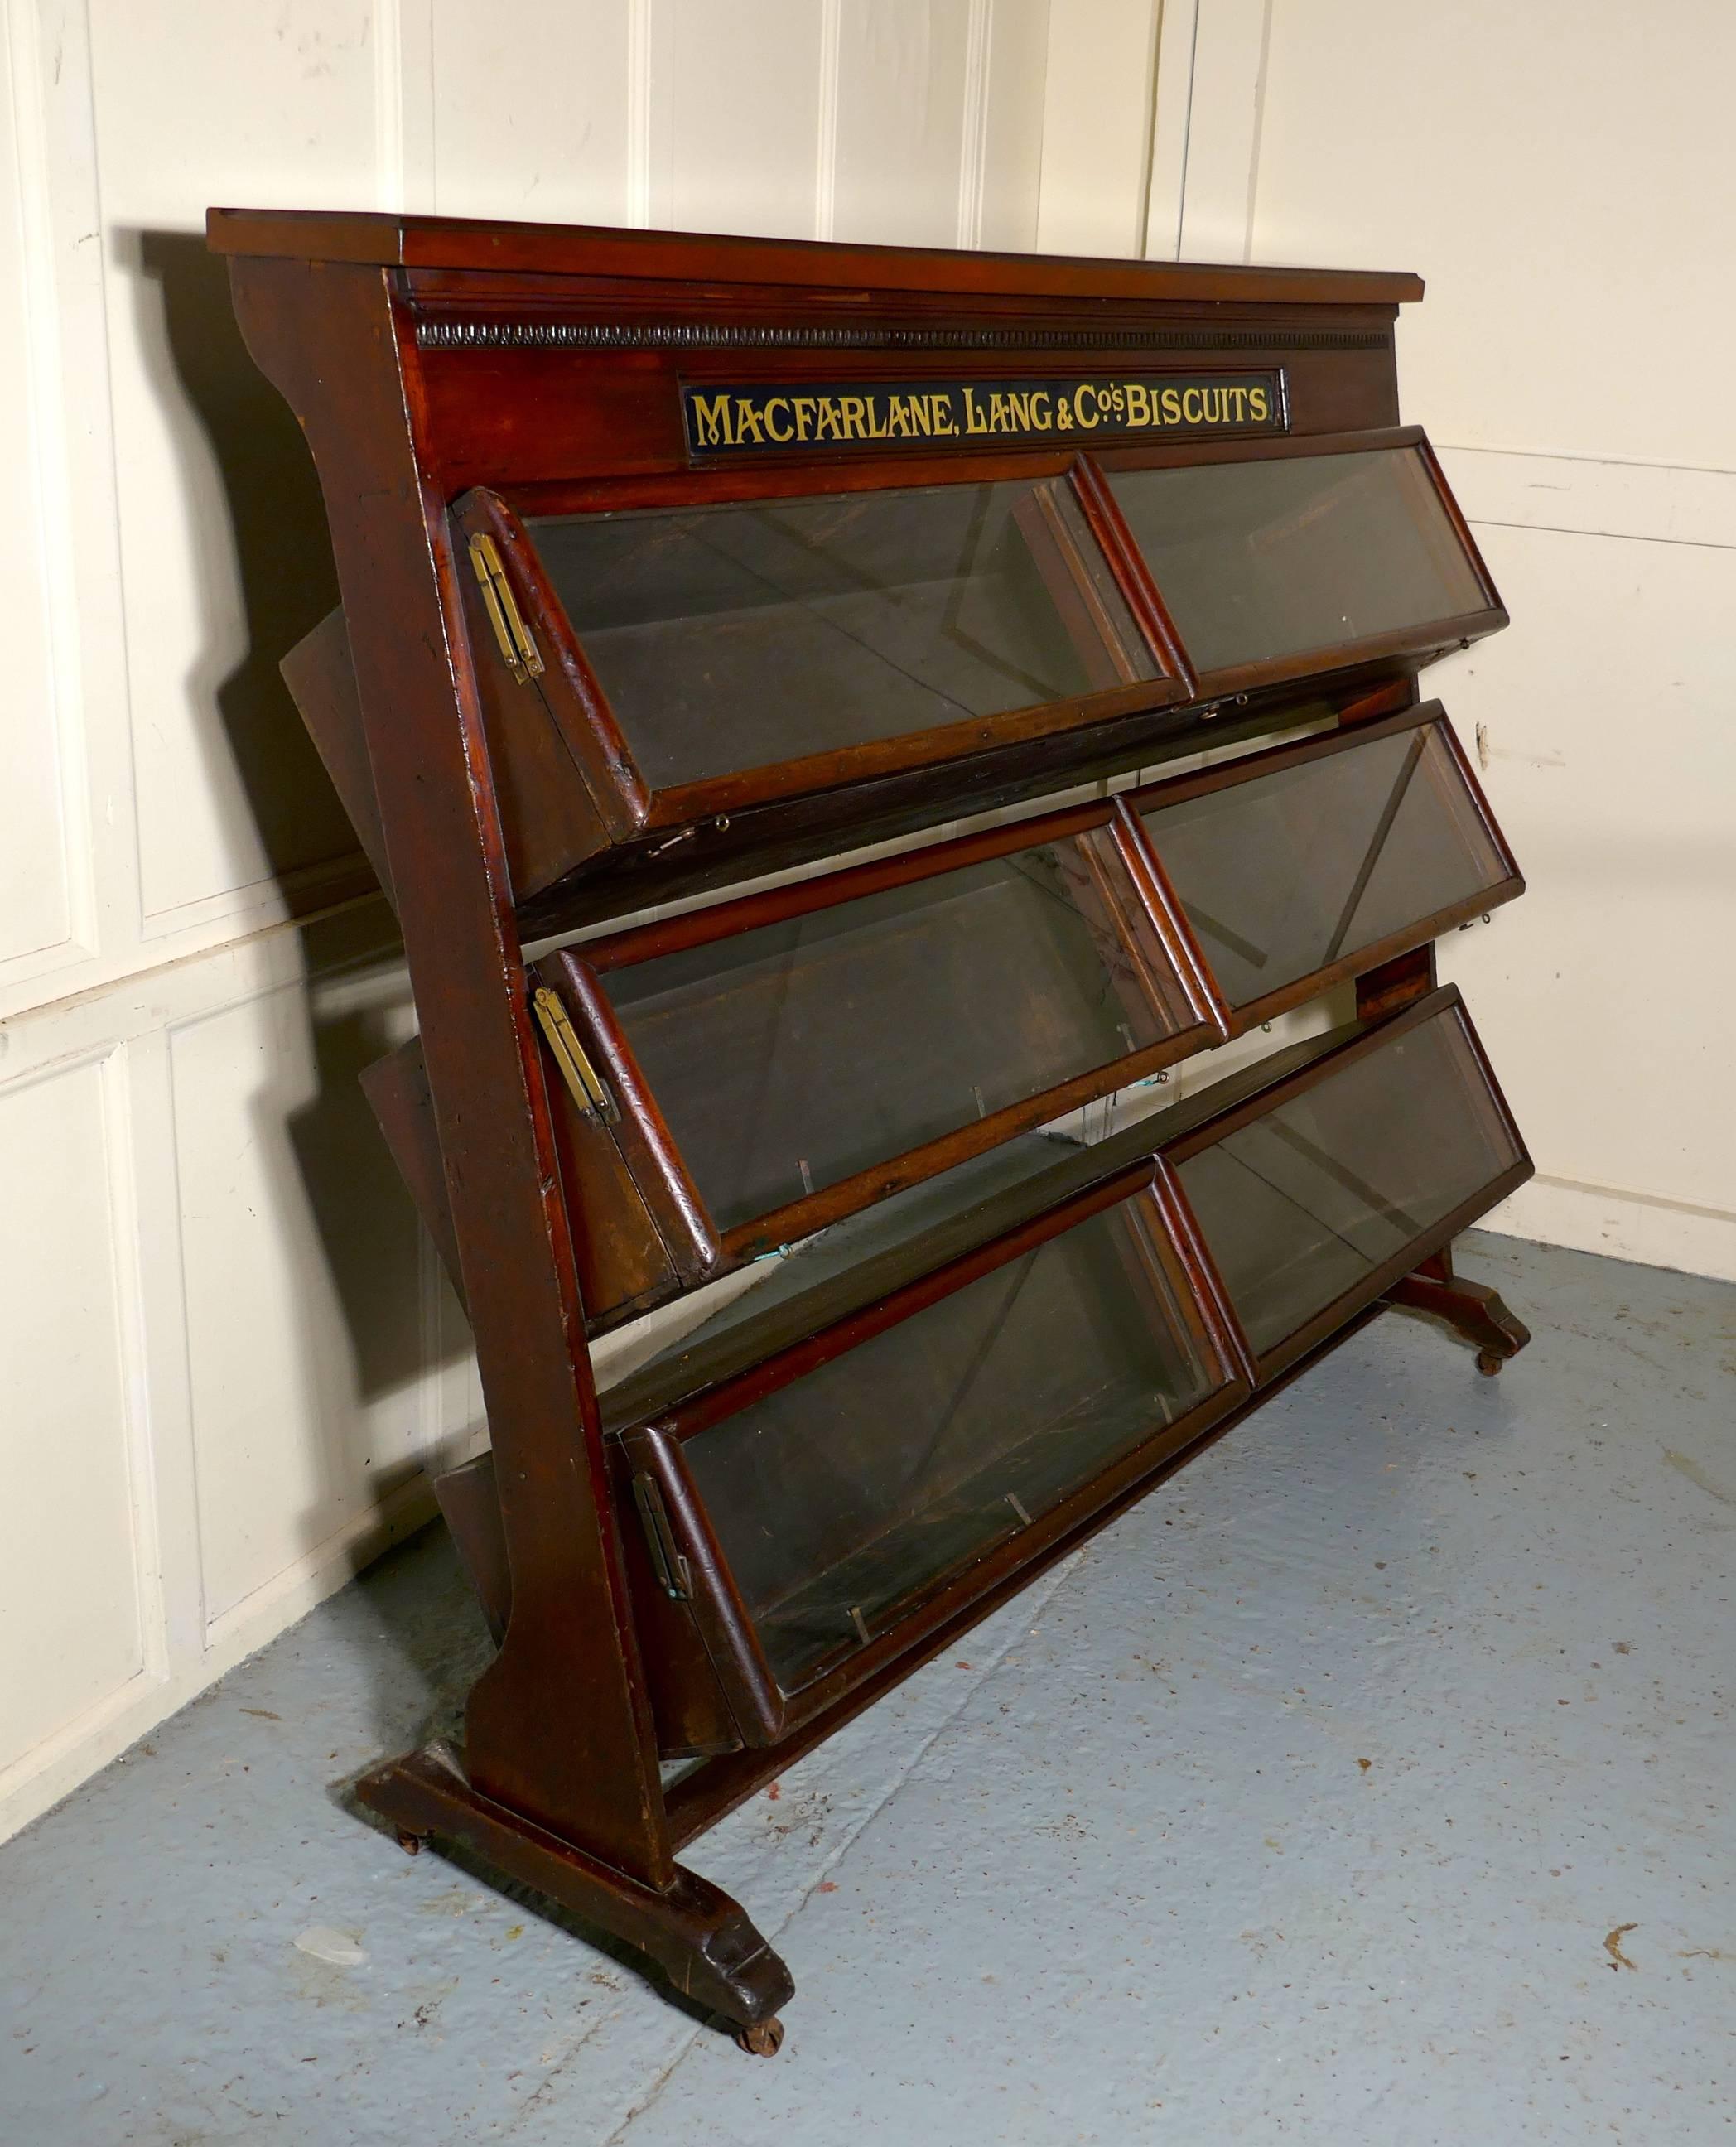 Noyer MacFarlane. Lang and Co's Biscuits Shop Display Cabinet 